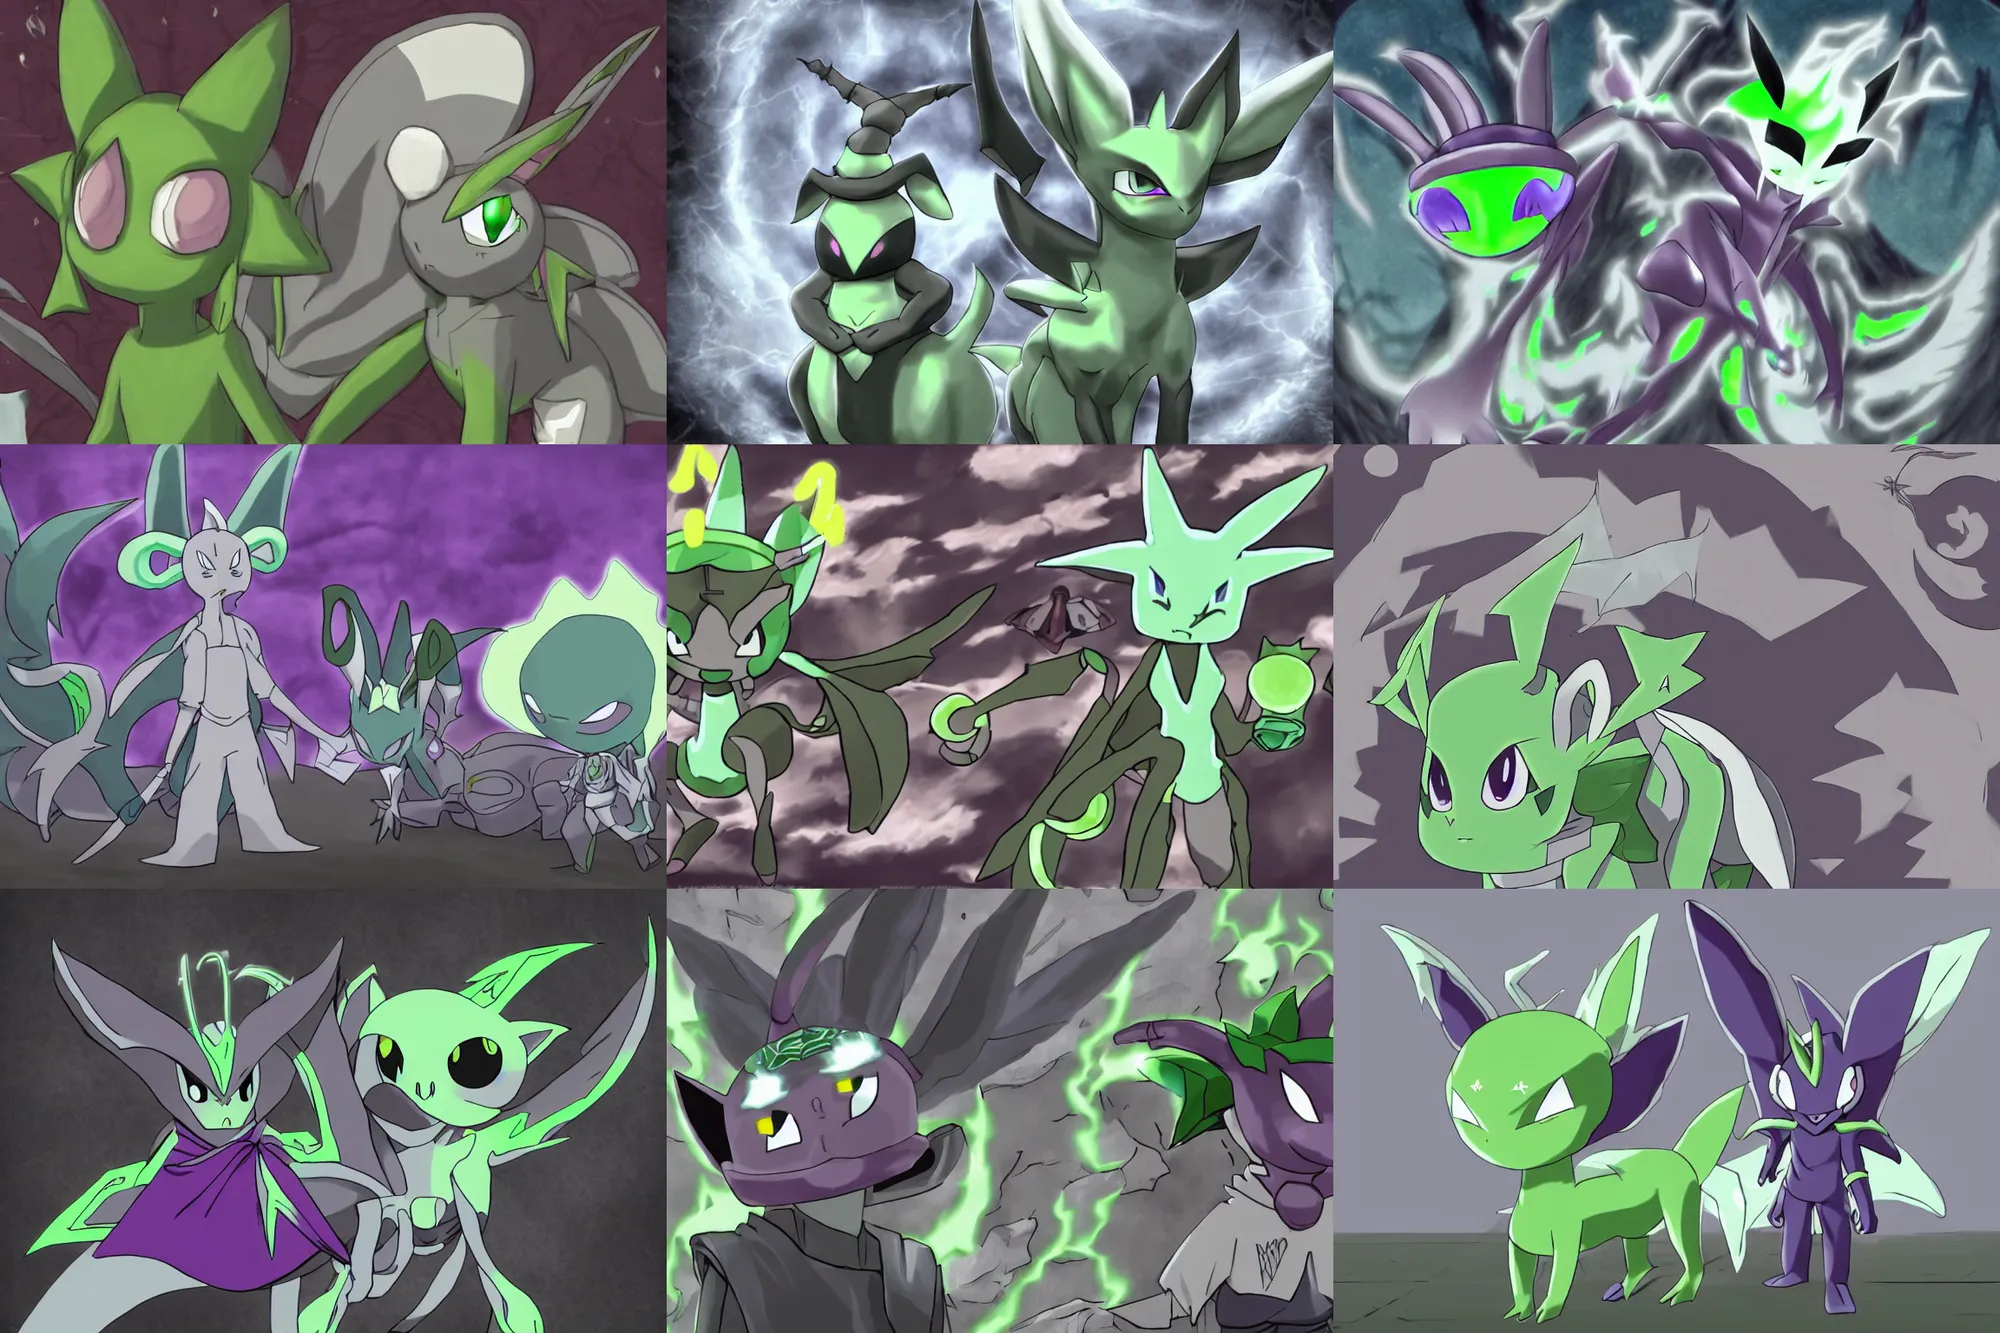 Prompt: grayscale low saturation video game elden clay celebi : espeons reprisal star valley resident evil mismagius oblivion mystery dungeon ultrahd resident eevee wearing bandanna fighting espeon, the old god wearing a witch hat pokemon final gamecube